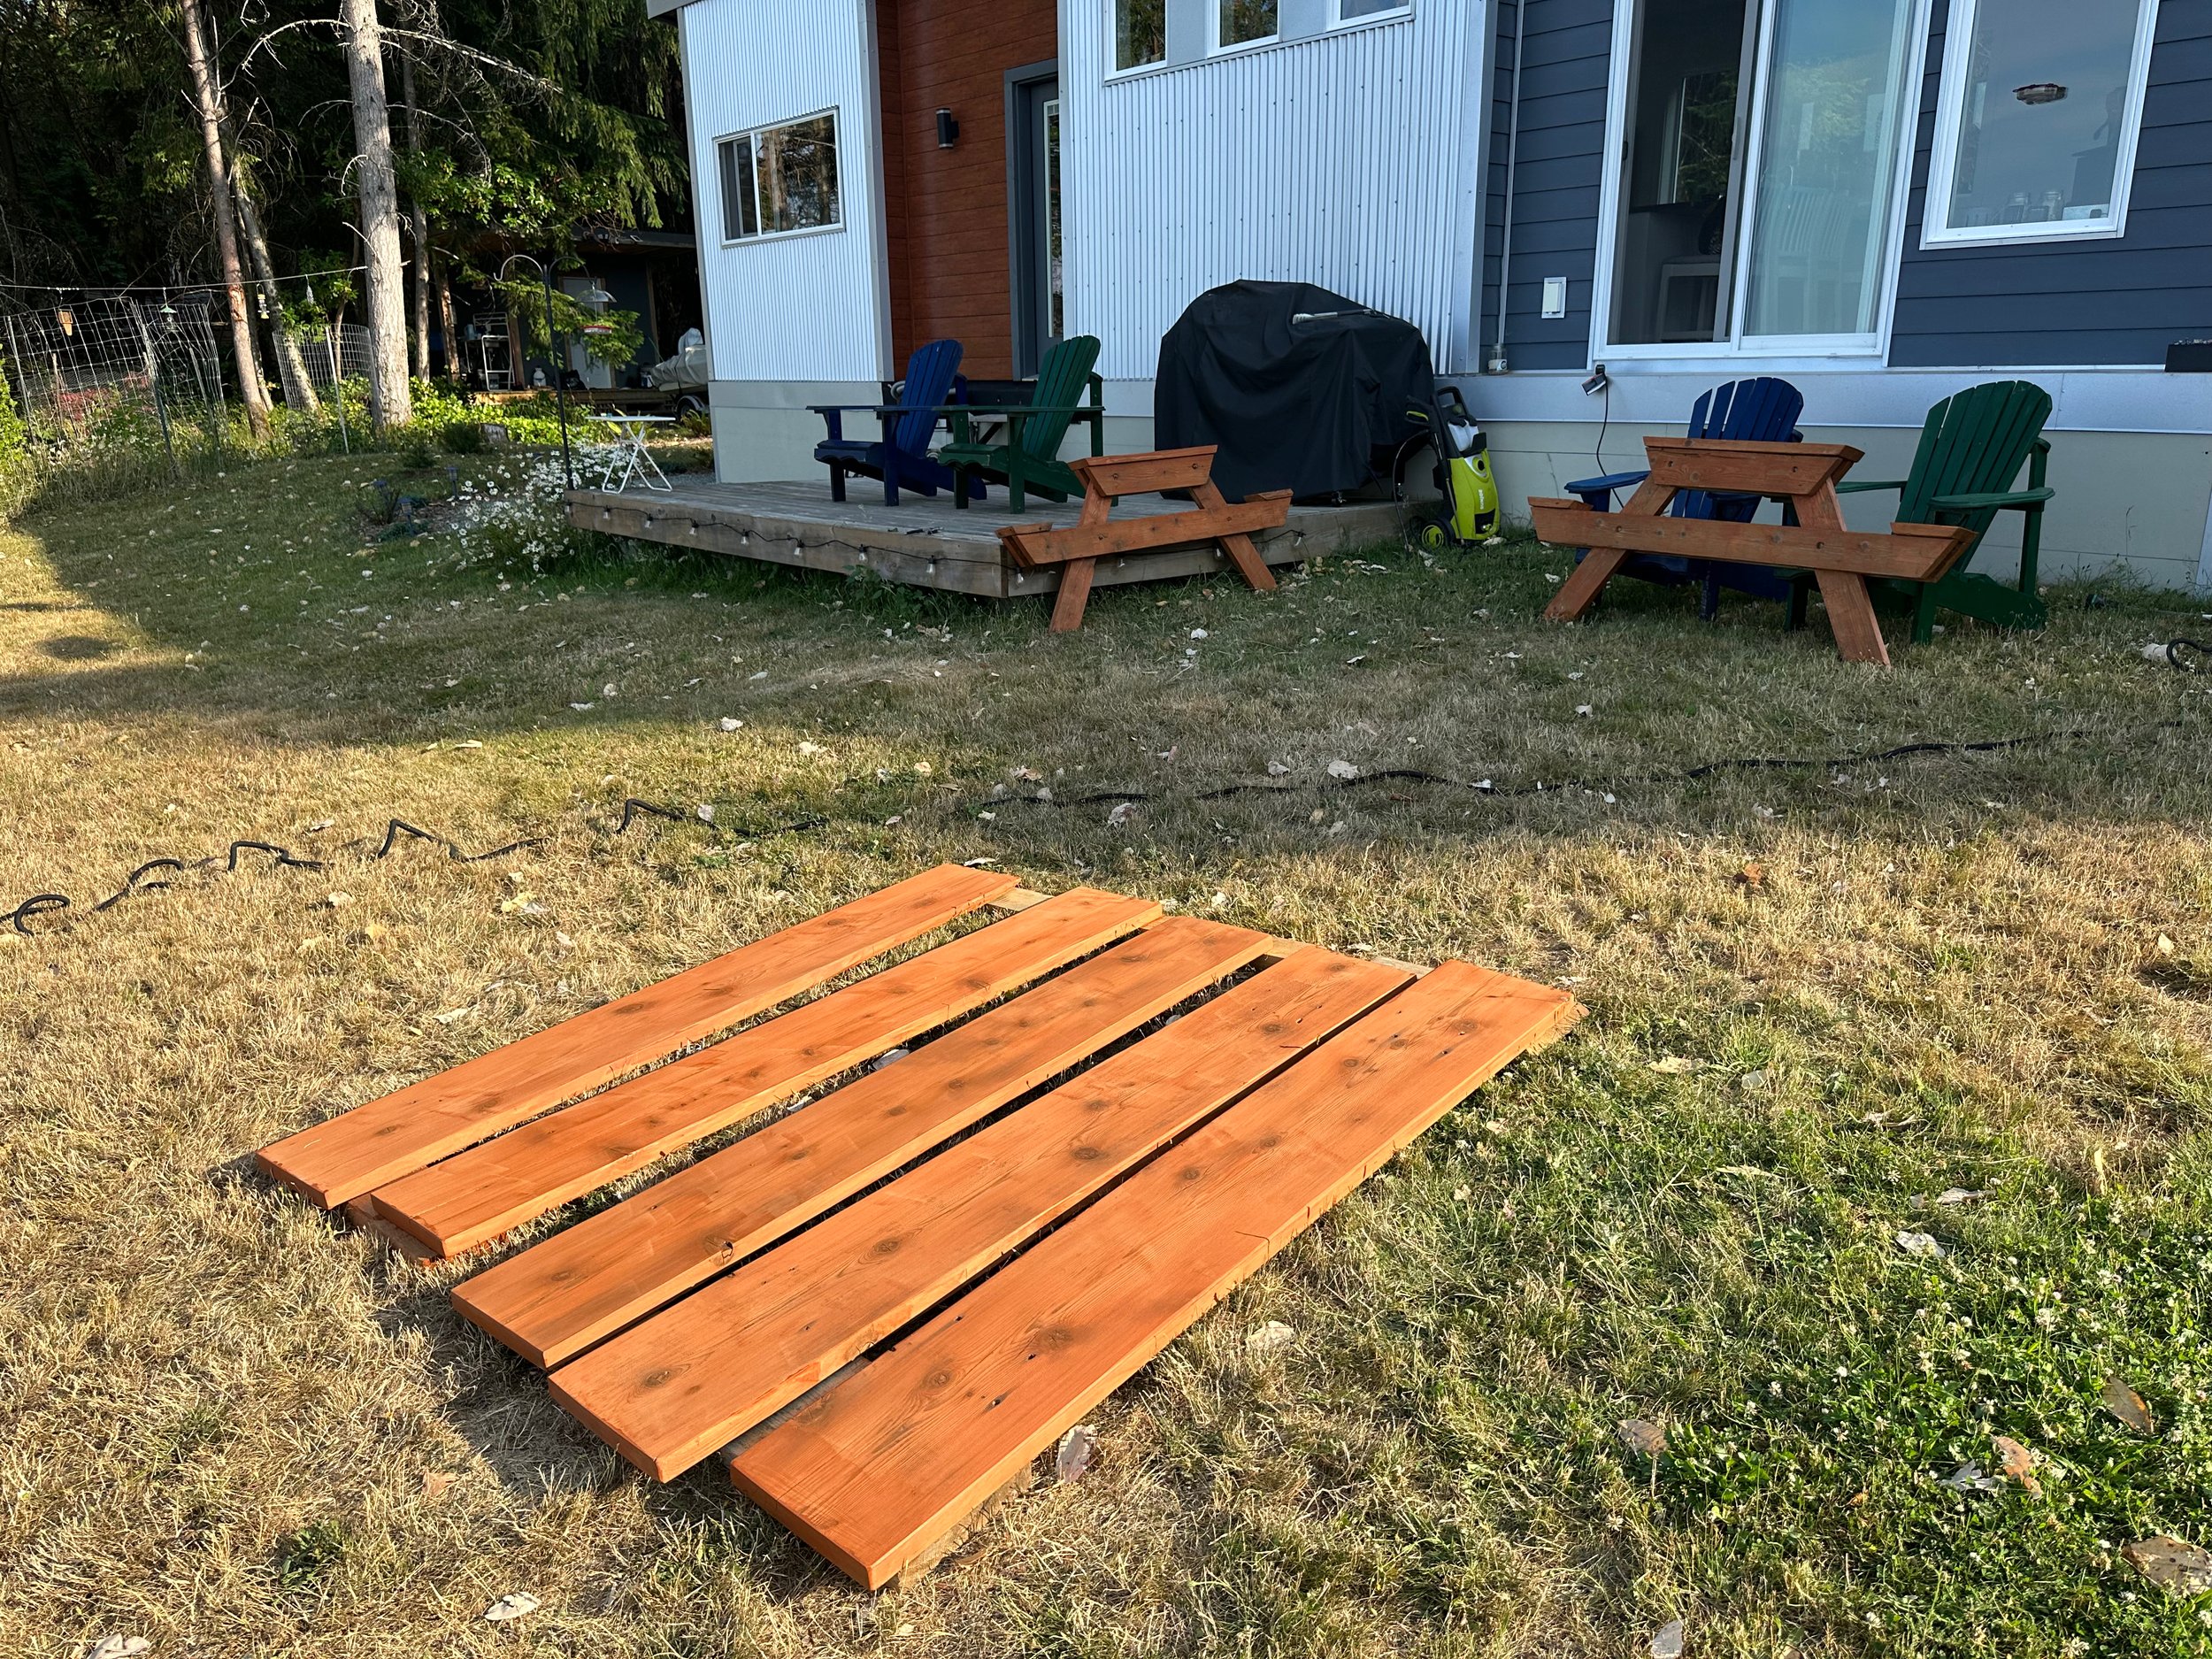  And then the next day, everything got a new coat of stain. Simon would be disappointed with my fine finishing skills (it’s not the most beautiful staining job ever), but it works for a picnic table.  